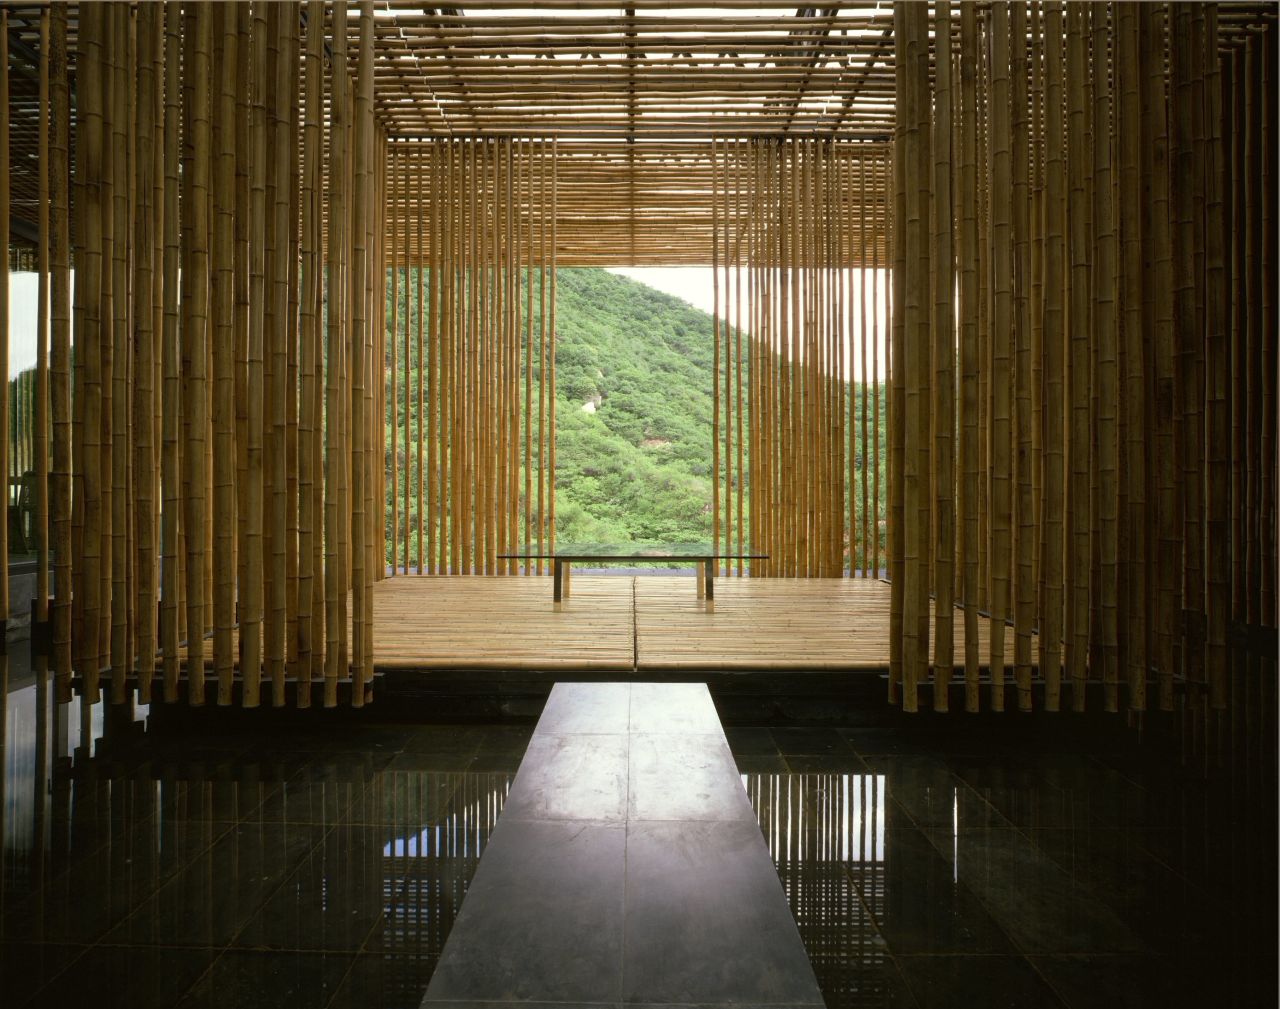 Kuma's dedication to architecture that incorporates nature saw him be one of the 10 architects invited to design a residence at this retreat at the Great Wall of China.    